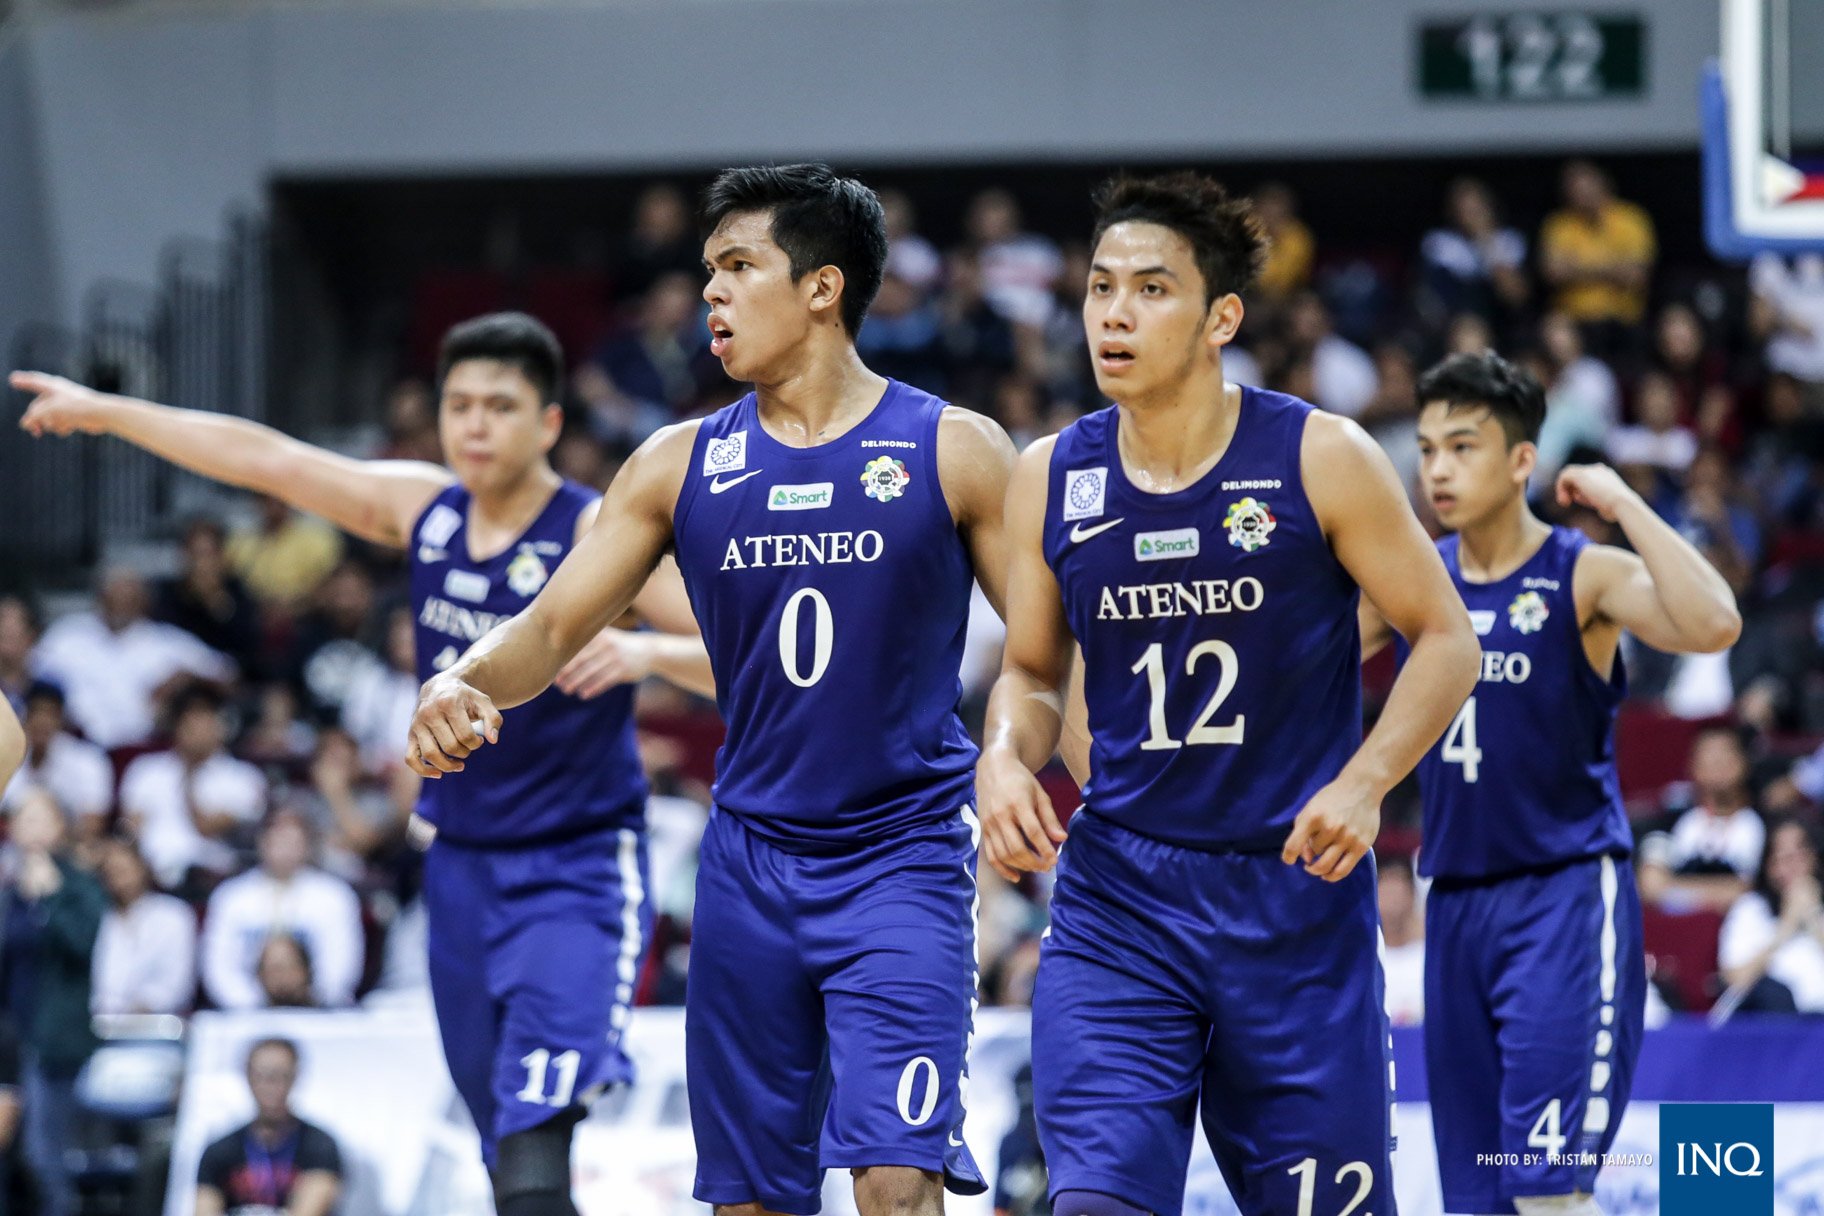 The young Ateneo Blue Eagles. Photo by Tristan Tamayo/INQUIRER.net